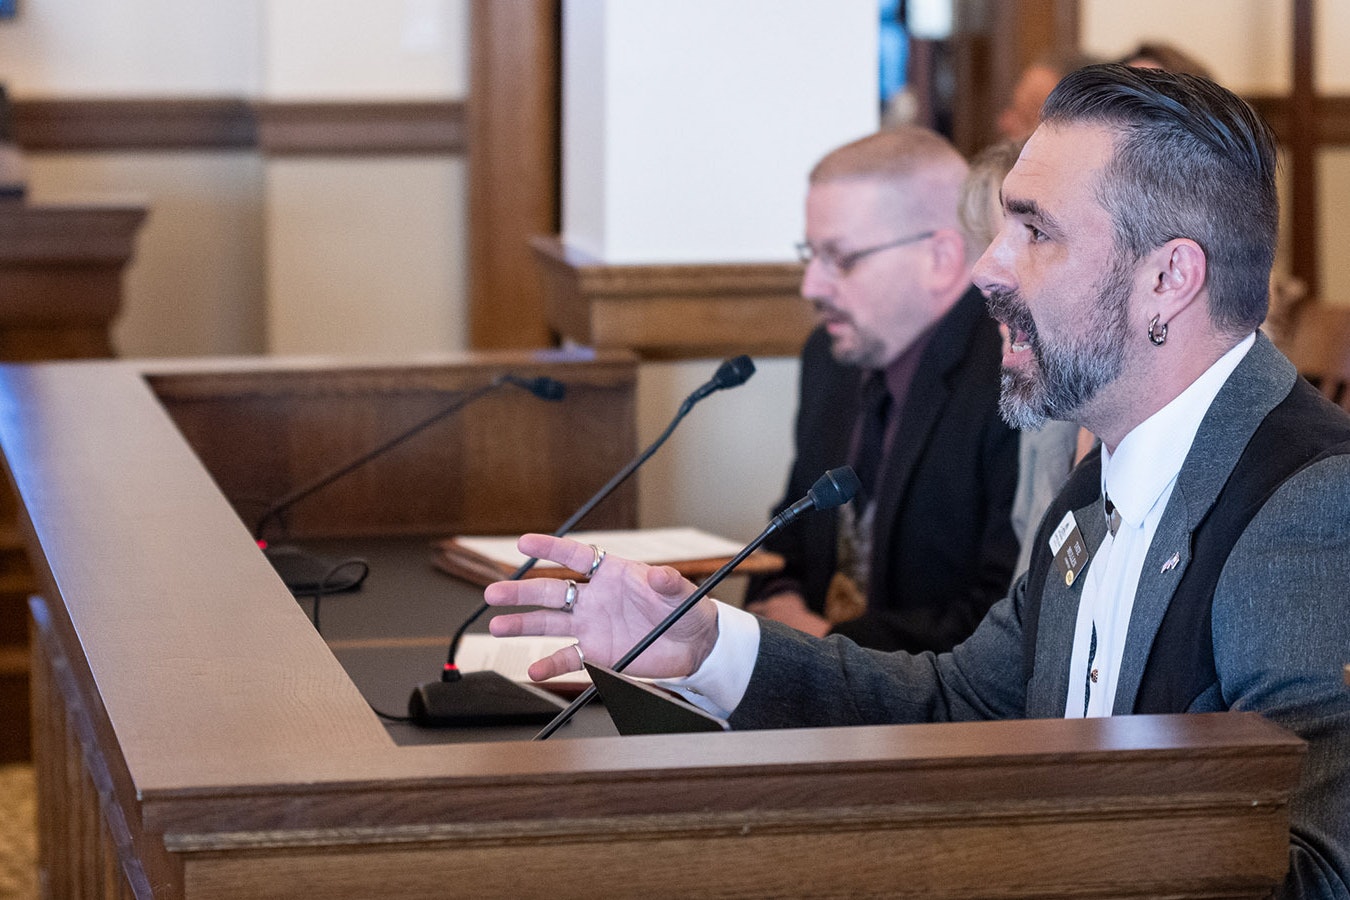 Tate Mullen, government relations director for the Wyoming Education Association, testifies against a bill that would establish an education savings account in Wyoming.